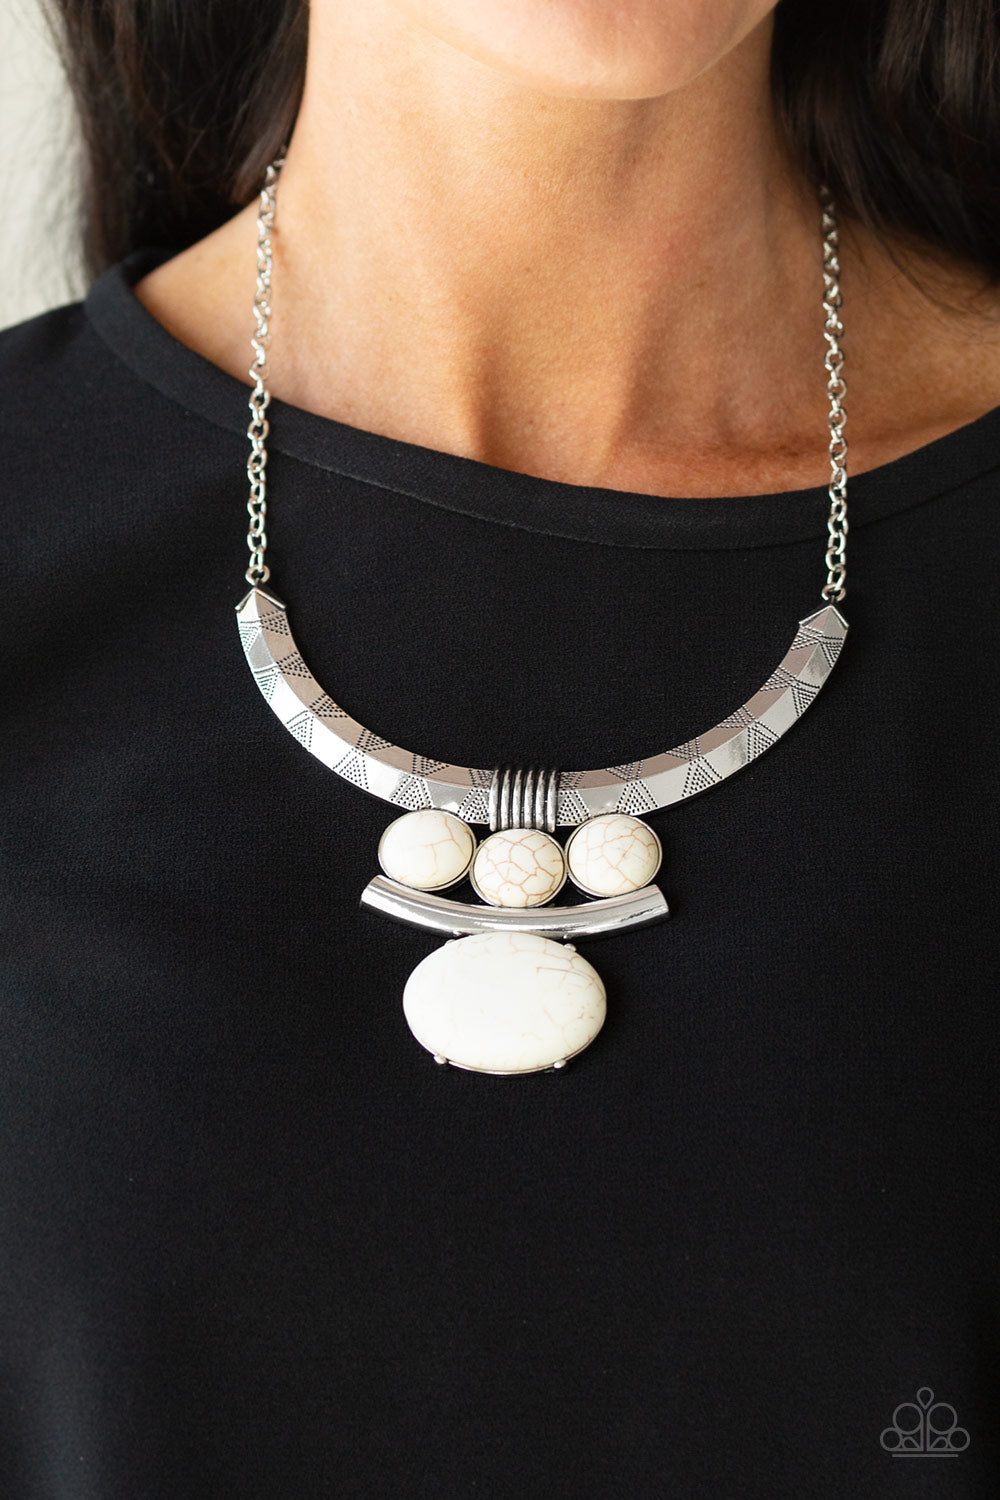 Commander In CHIEFETTE White Necklace - Paparazzi Accessories  Oversized white stone accents alternate with mismatched silver frames, coalescing into a dramatic tribal inspired pendant below the collar. Features an adjustable clasp closure.  All Paparazzi Accessories are lead free and nickel free!  Sold as one individual necklace. Includes one pair of matching earrings.